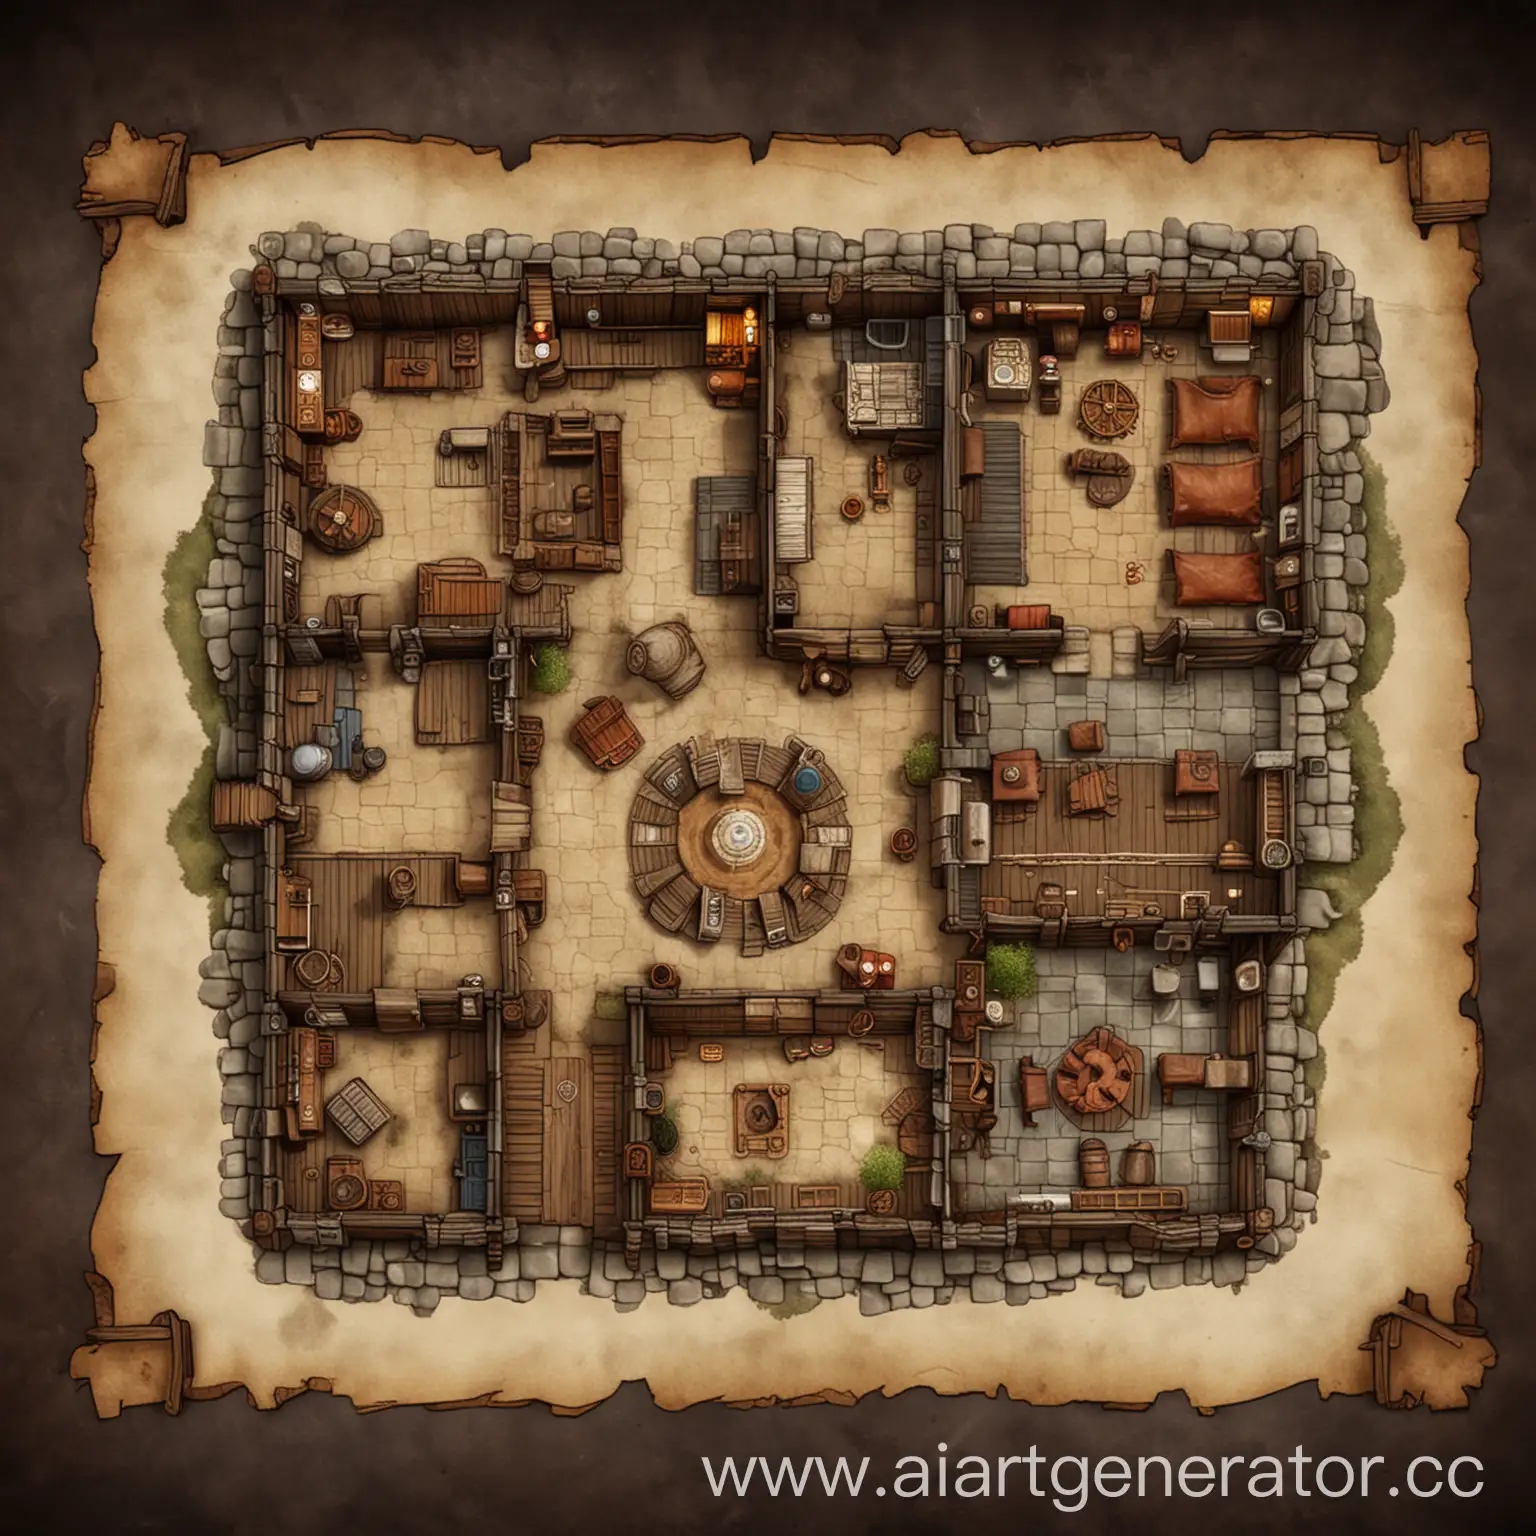 Fantasy-RPG-Map-with-Tavern-Forge-and-Barracks-Detailed-Dungeons-and-Dragons-Setting